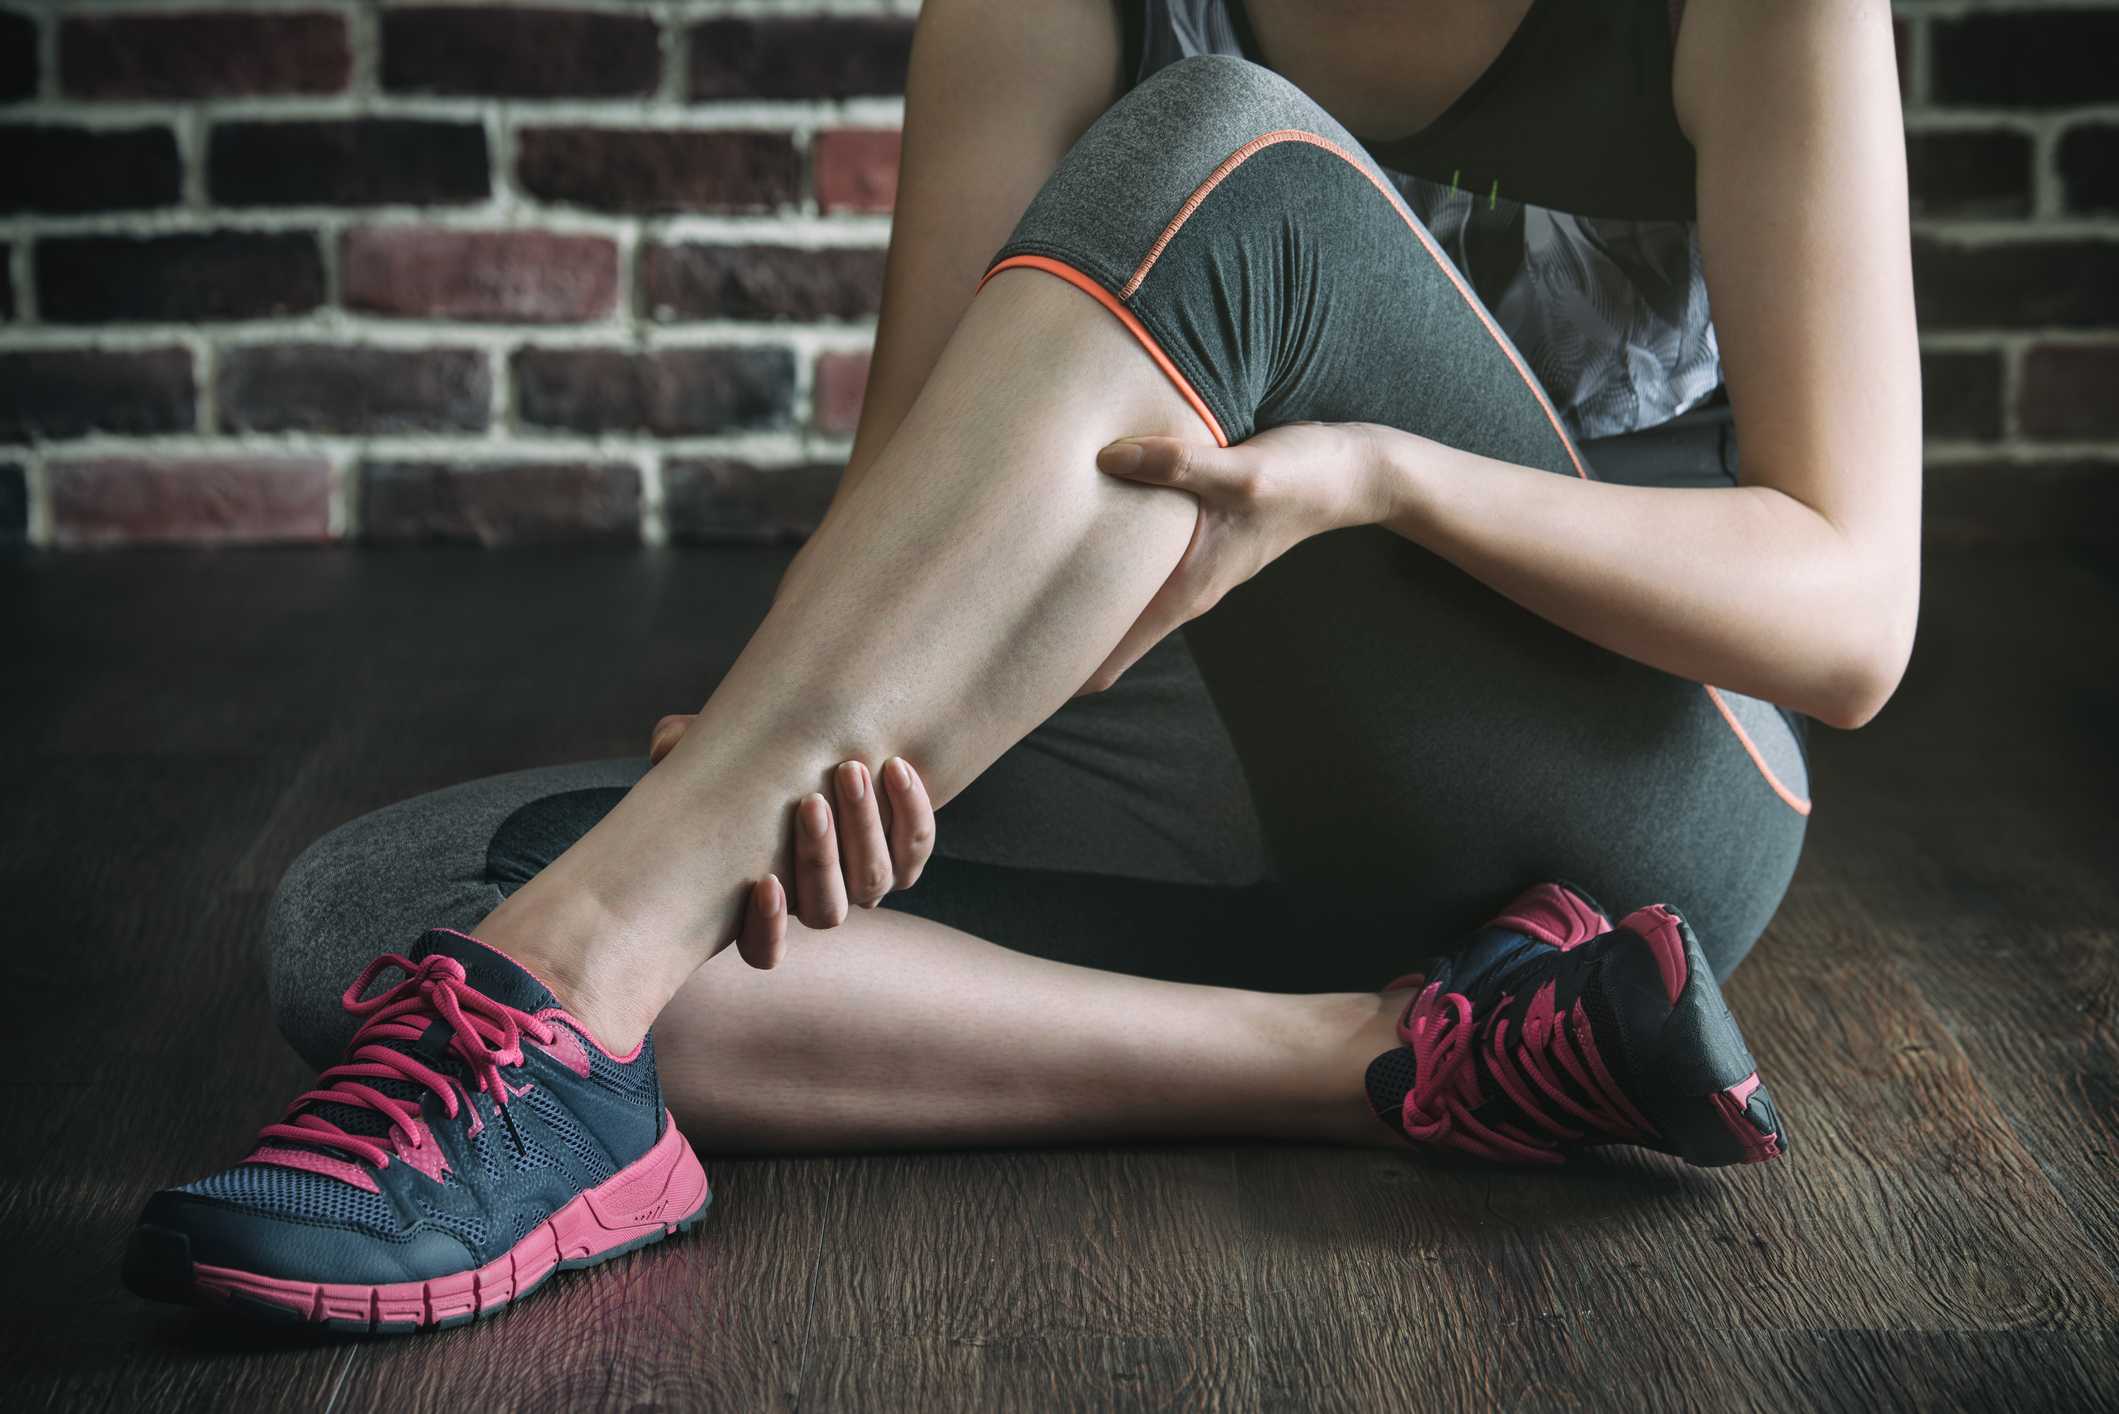 Leg Pain - Causes, Treatment, and Prevention